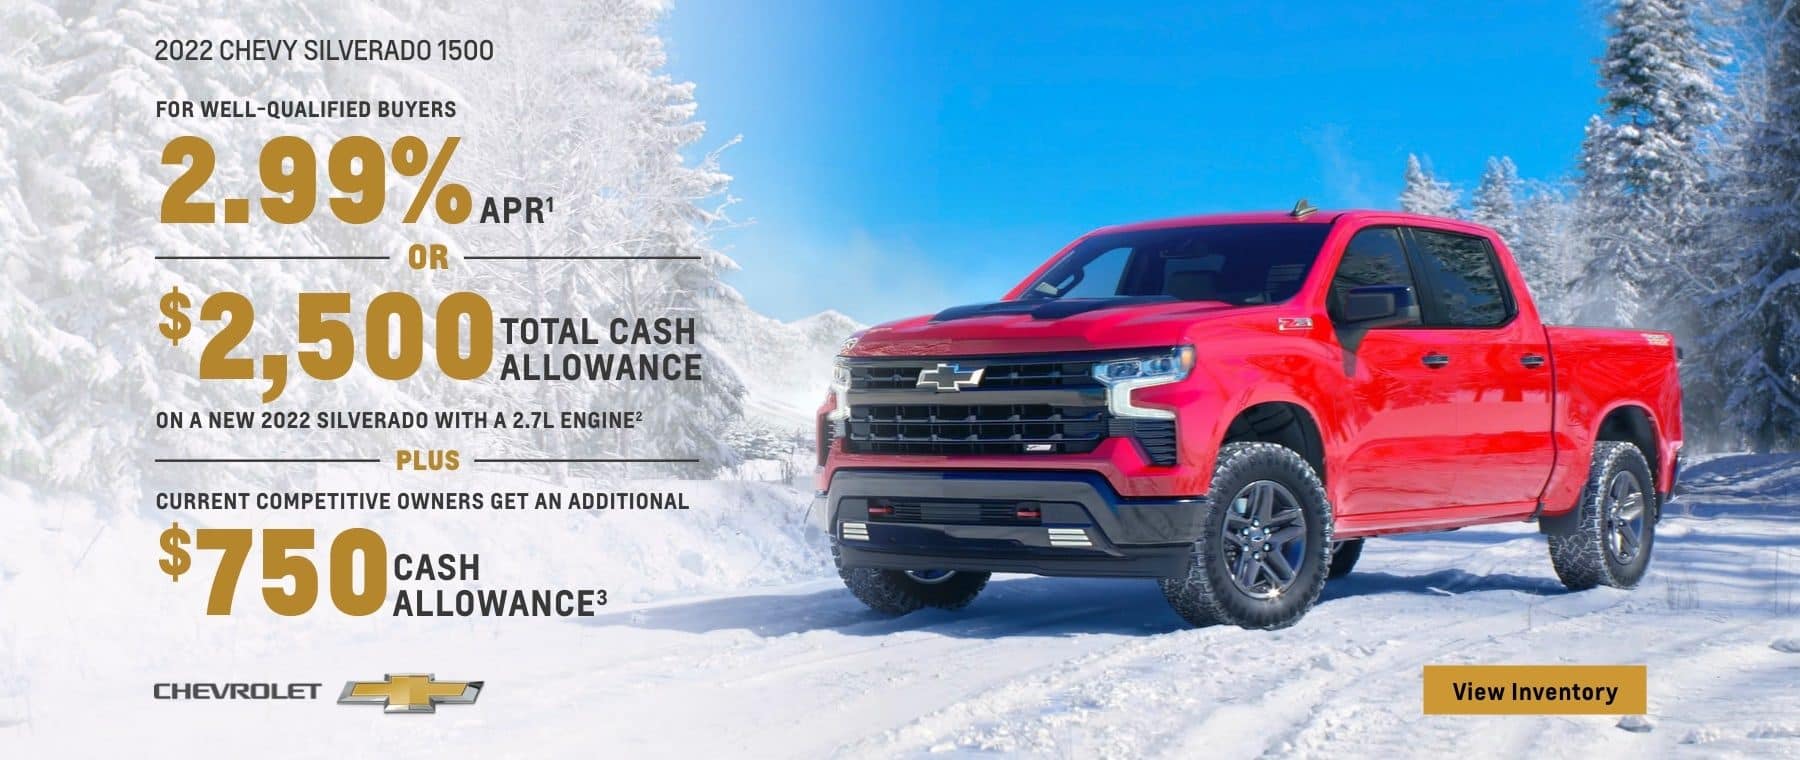 2022 Chevy Silverado 1500. For well-qualified buyers 2.99% APR. Or, $2,500 total cash allowance on a new 2022 Silverado with a 2.7L engine. Plus, current competitive owners get an additional $750 cash allowance.